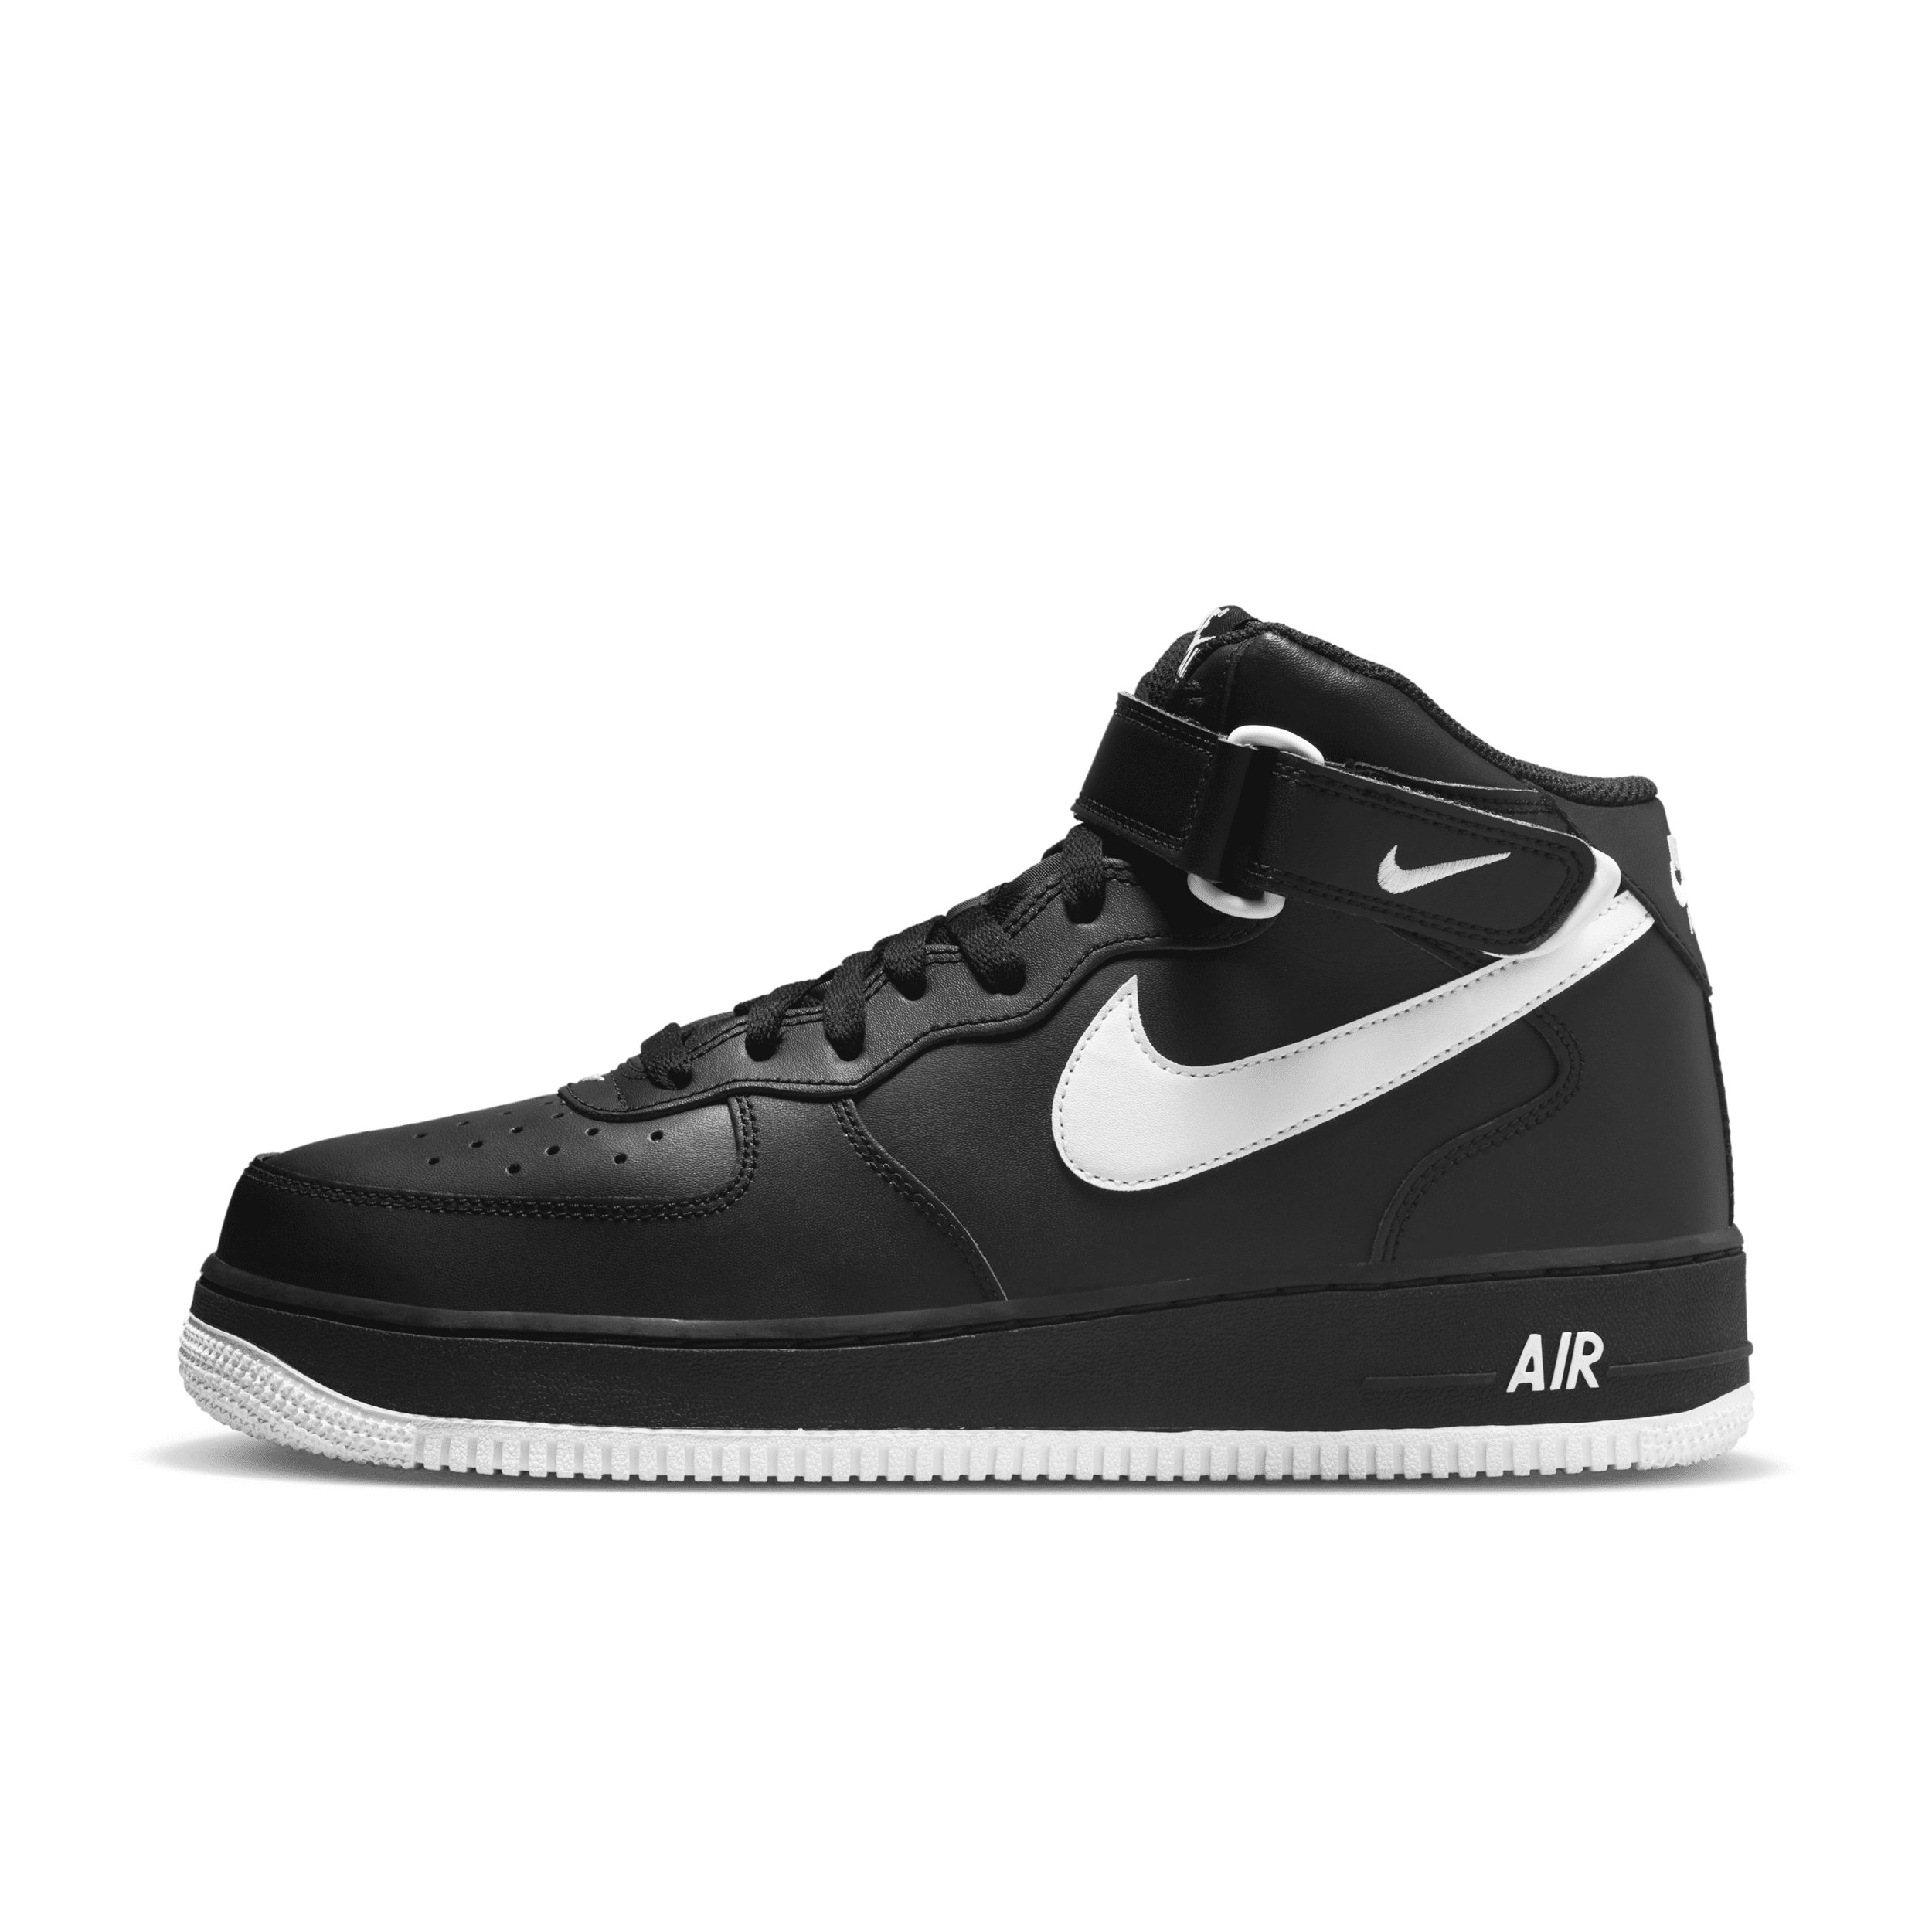 Nike Men's Air Force 1 Mid '07 Shoes In Black